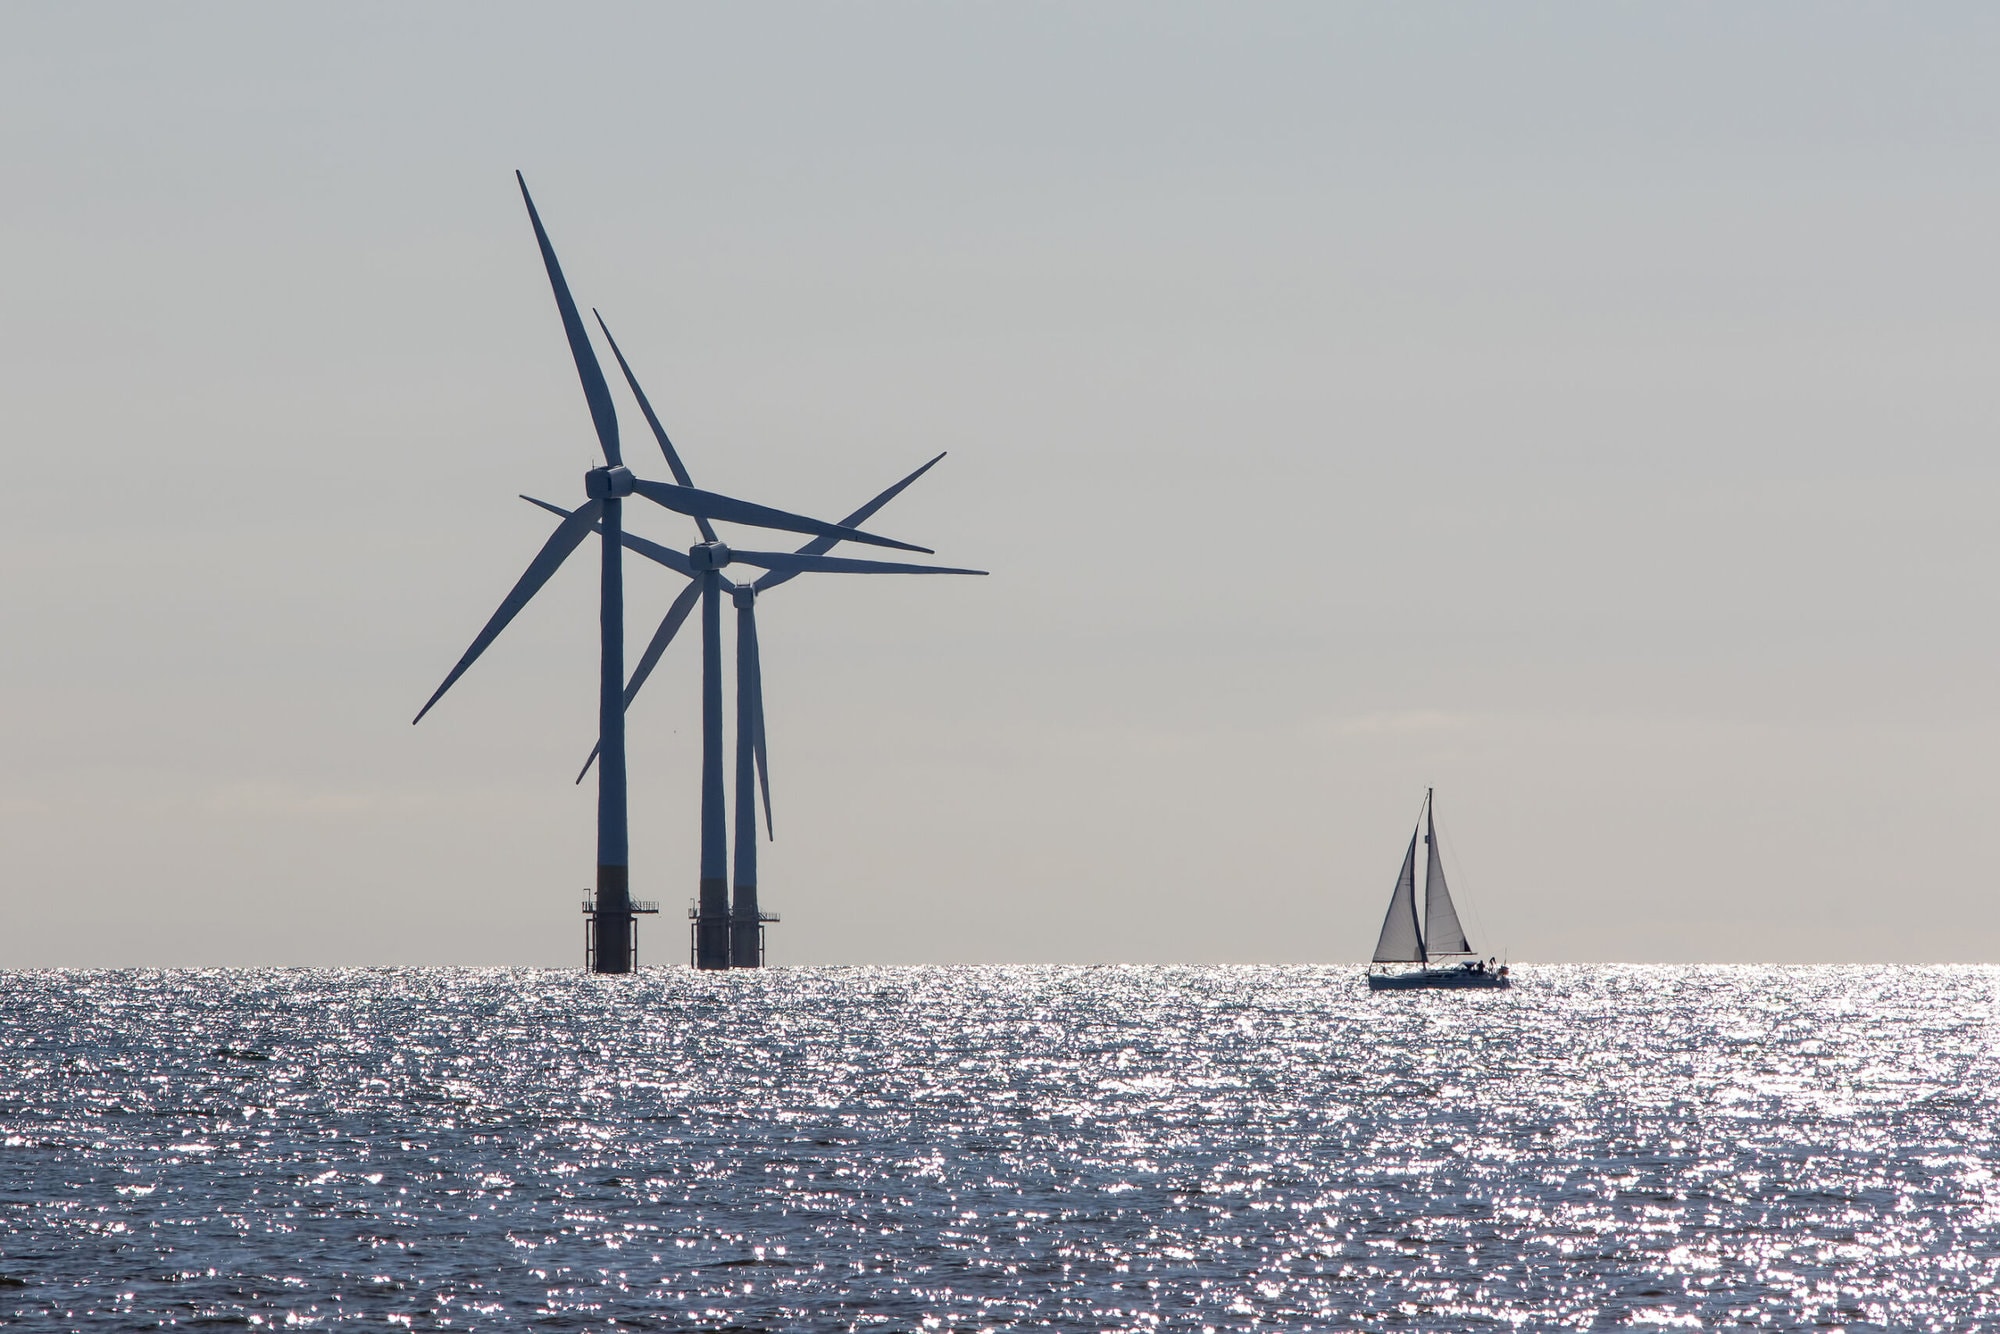 Wind power. Environmentally friendly sailing yacht. Offshore windfarm turbines. Tranquil scene of renewable resource power and travel with low carbon footprint lifestyle. Ecology landscape.